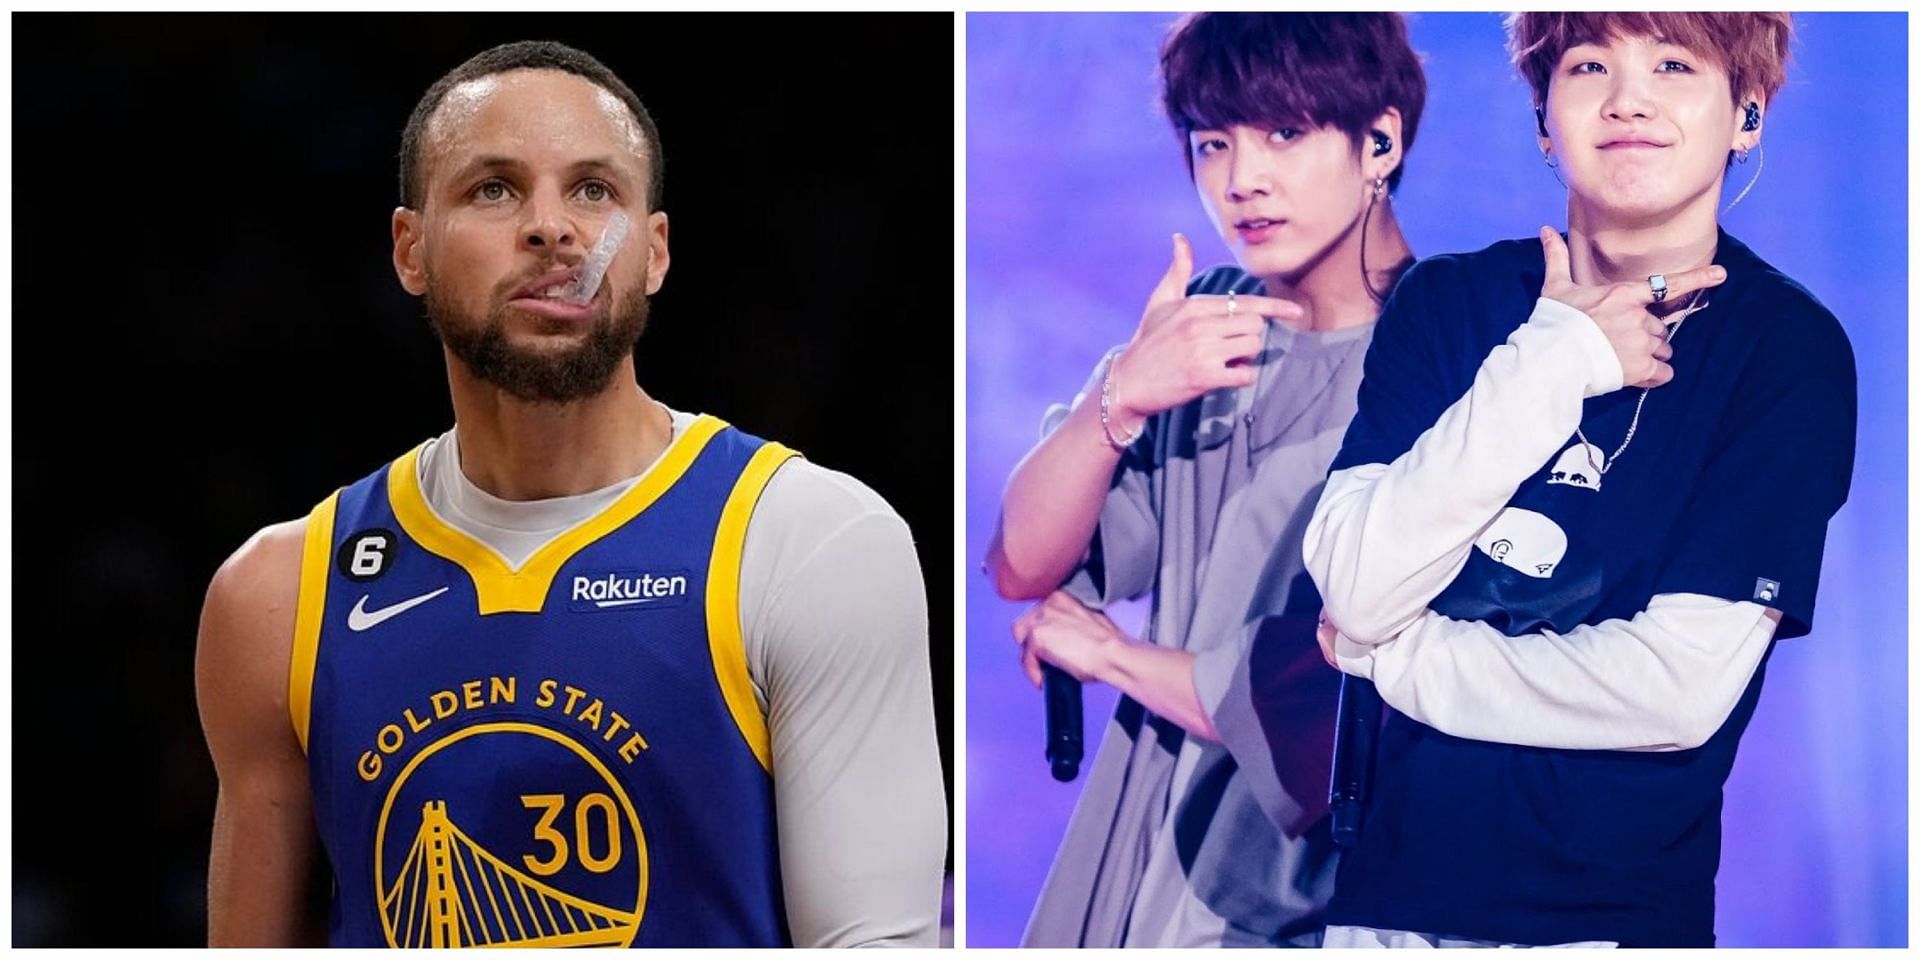 Steph curry fan Suga spotted in TikTok basketball clip of Jungkook